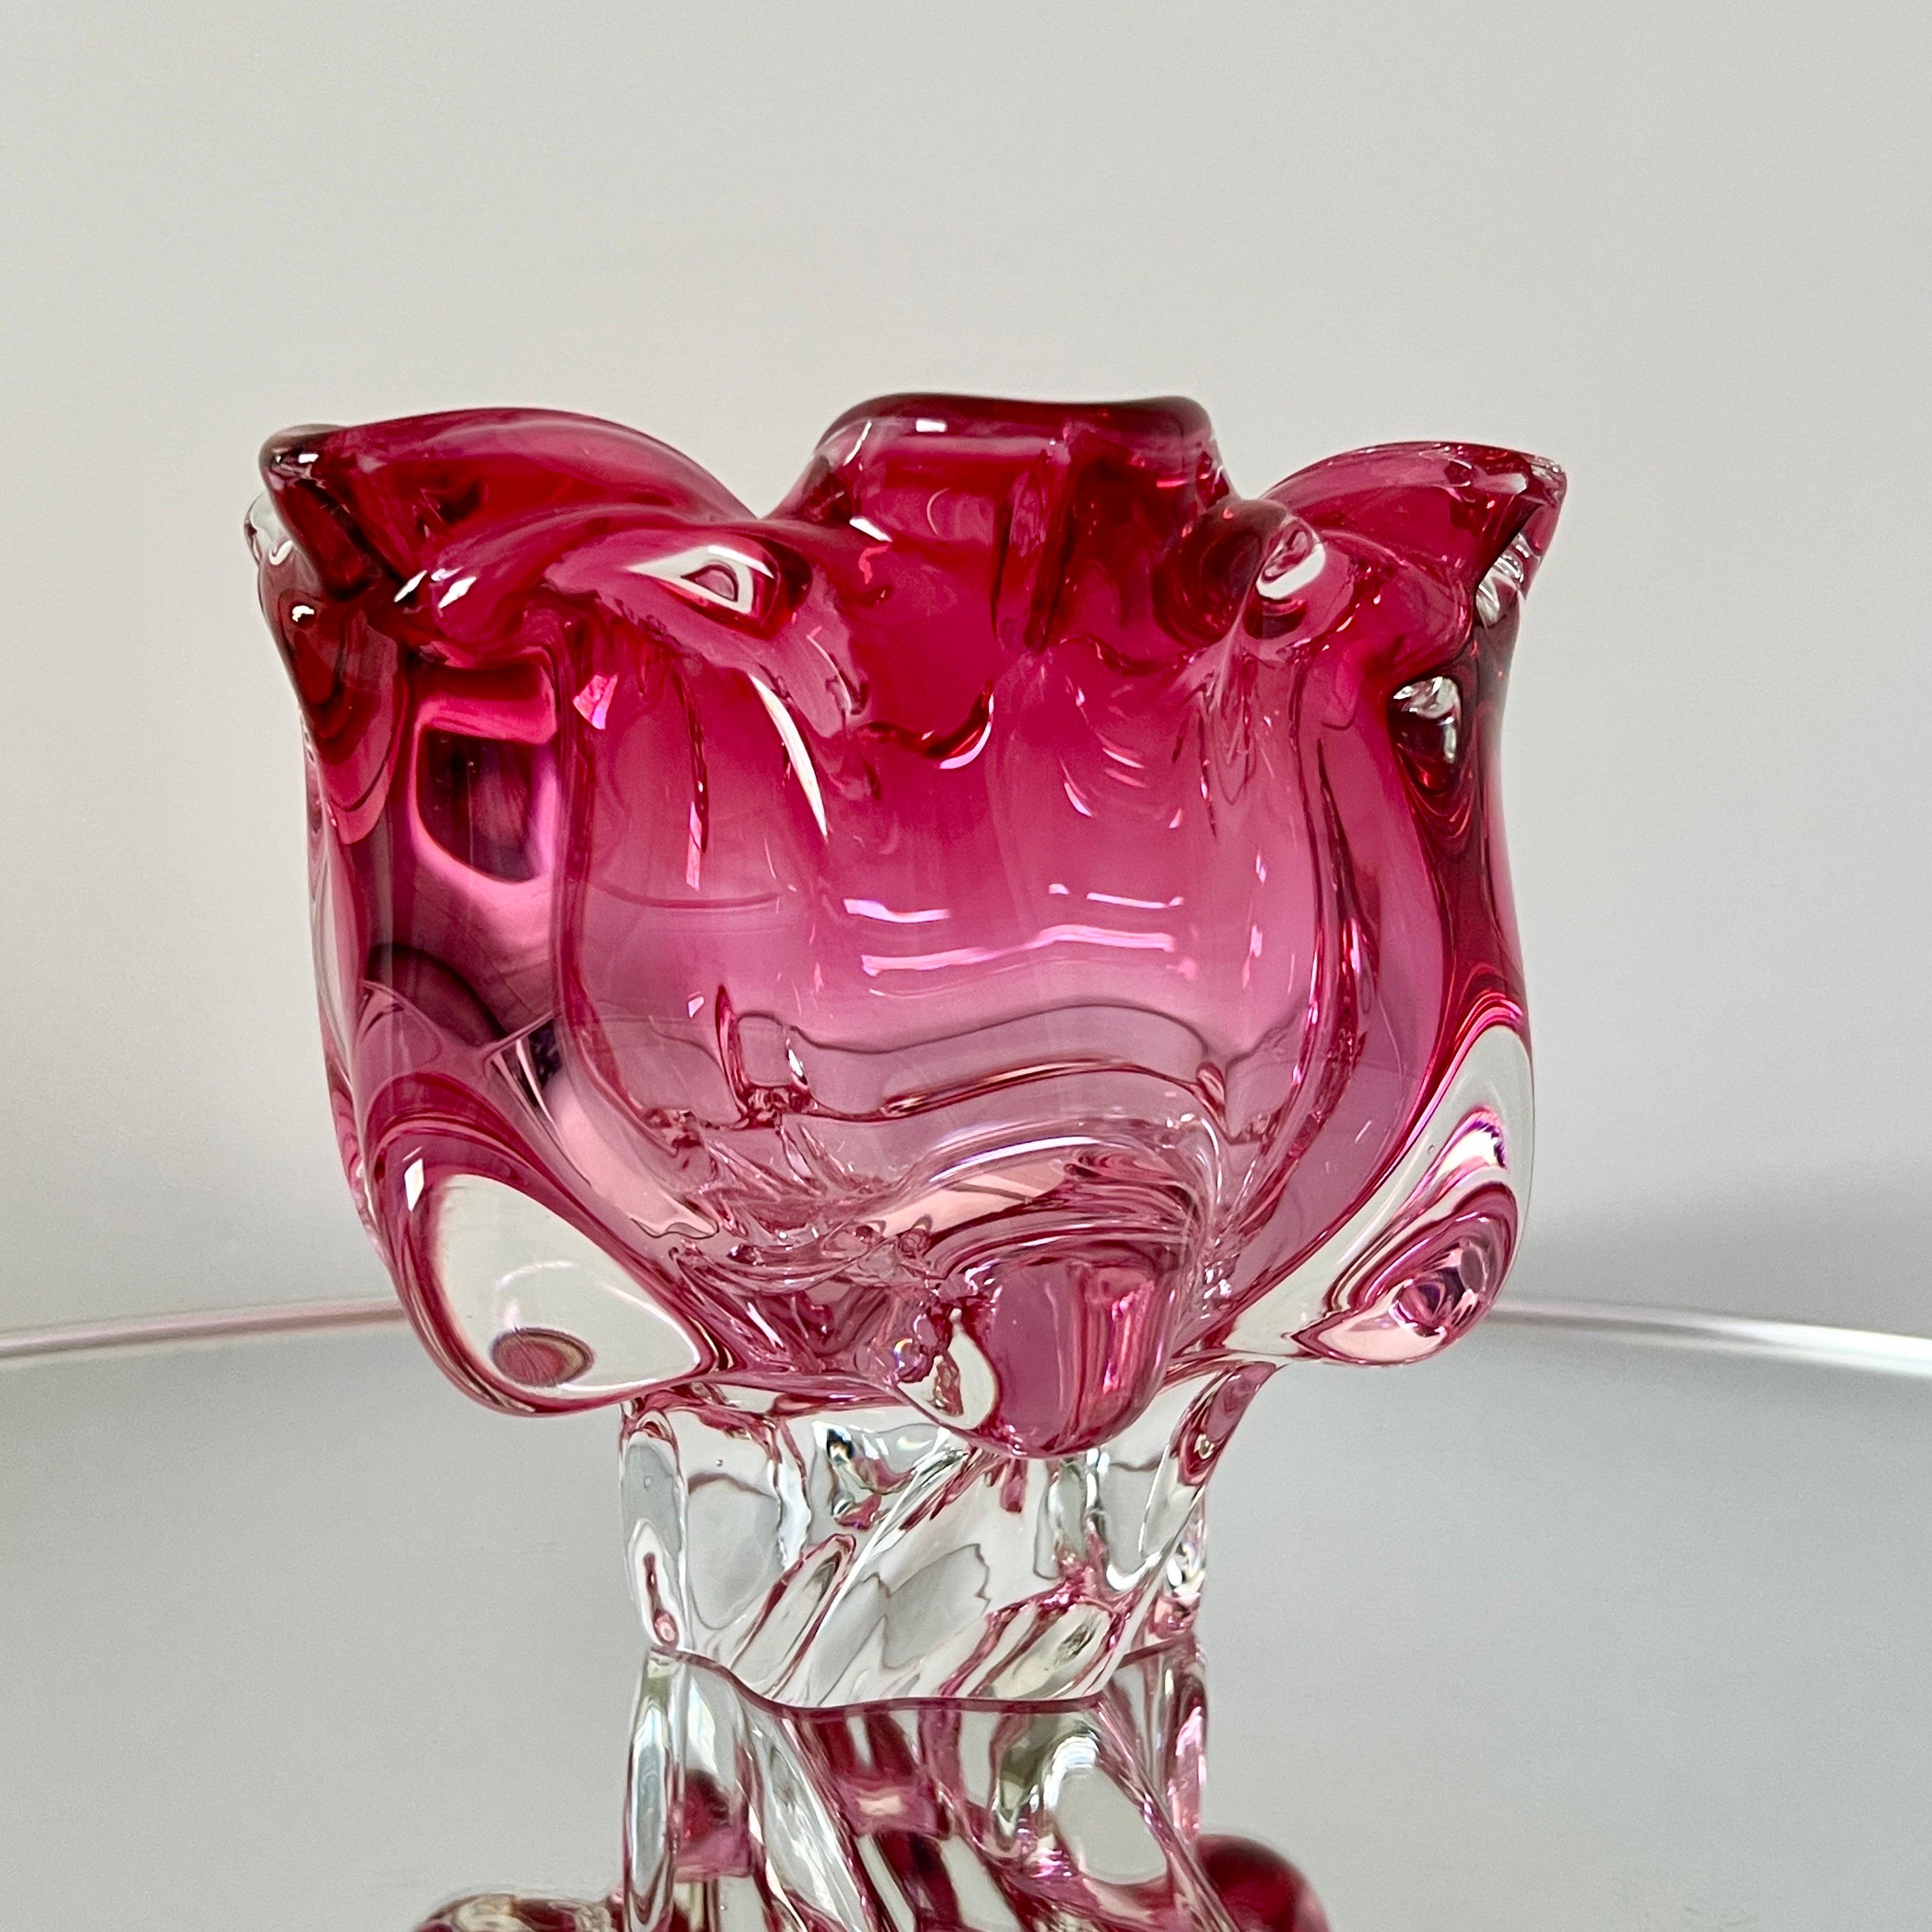 Hand-Crafted Pink Murano Floral Vase with Footed Base by Fratelli Toso, c. 1950's For Sale